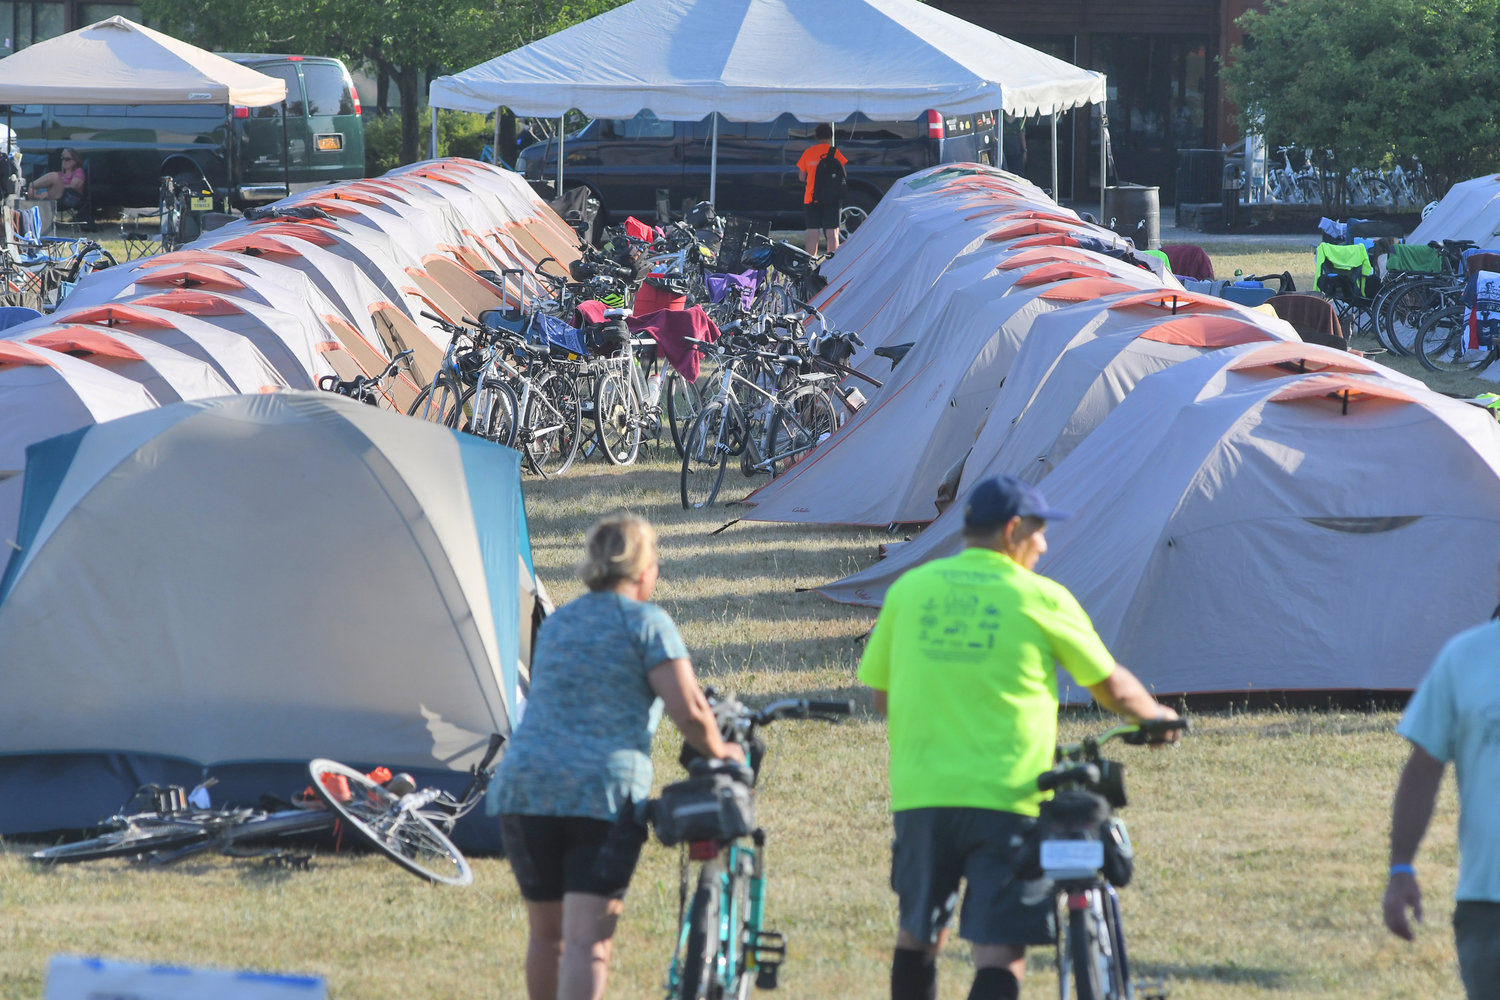 TENT CITY — Riders on the Cycle the Erie Canal Bike Tour will camp out on Fort Stanwix's lawn on Thursday night. Aftershopping at Rome's stores, patronizing its restaurants and eating breakfast at the Y, riders will hit the road for Canajoharie Friday morning.